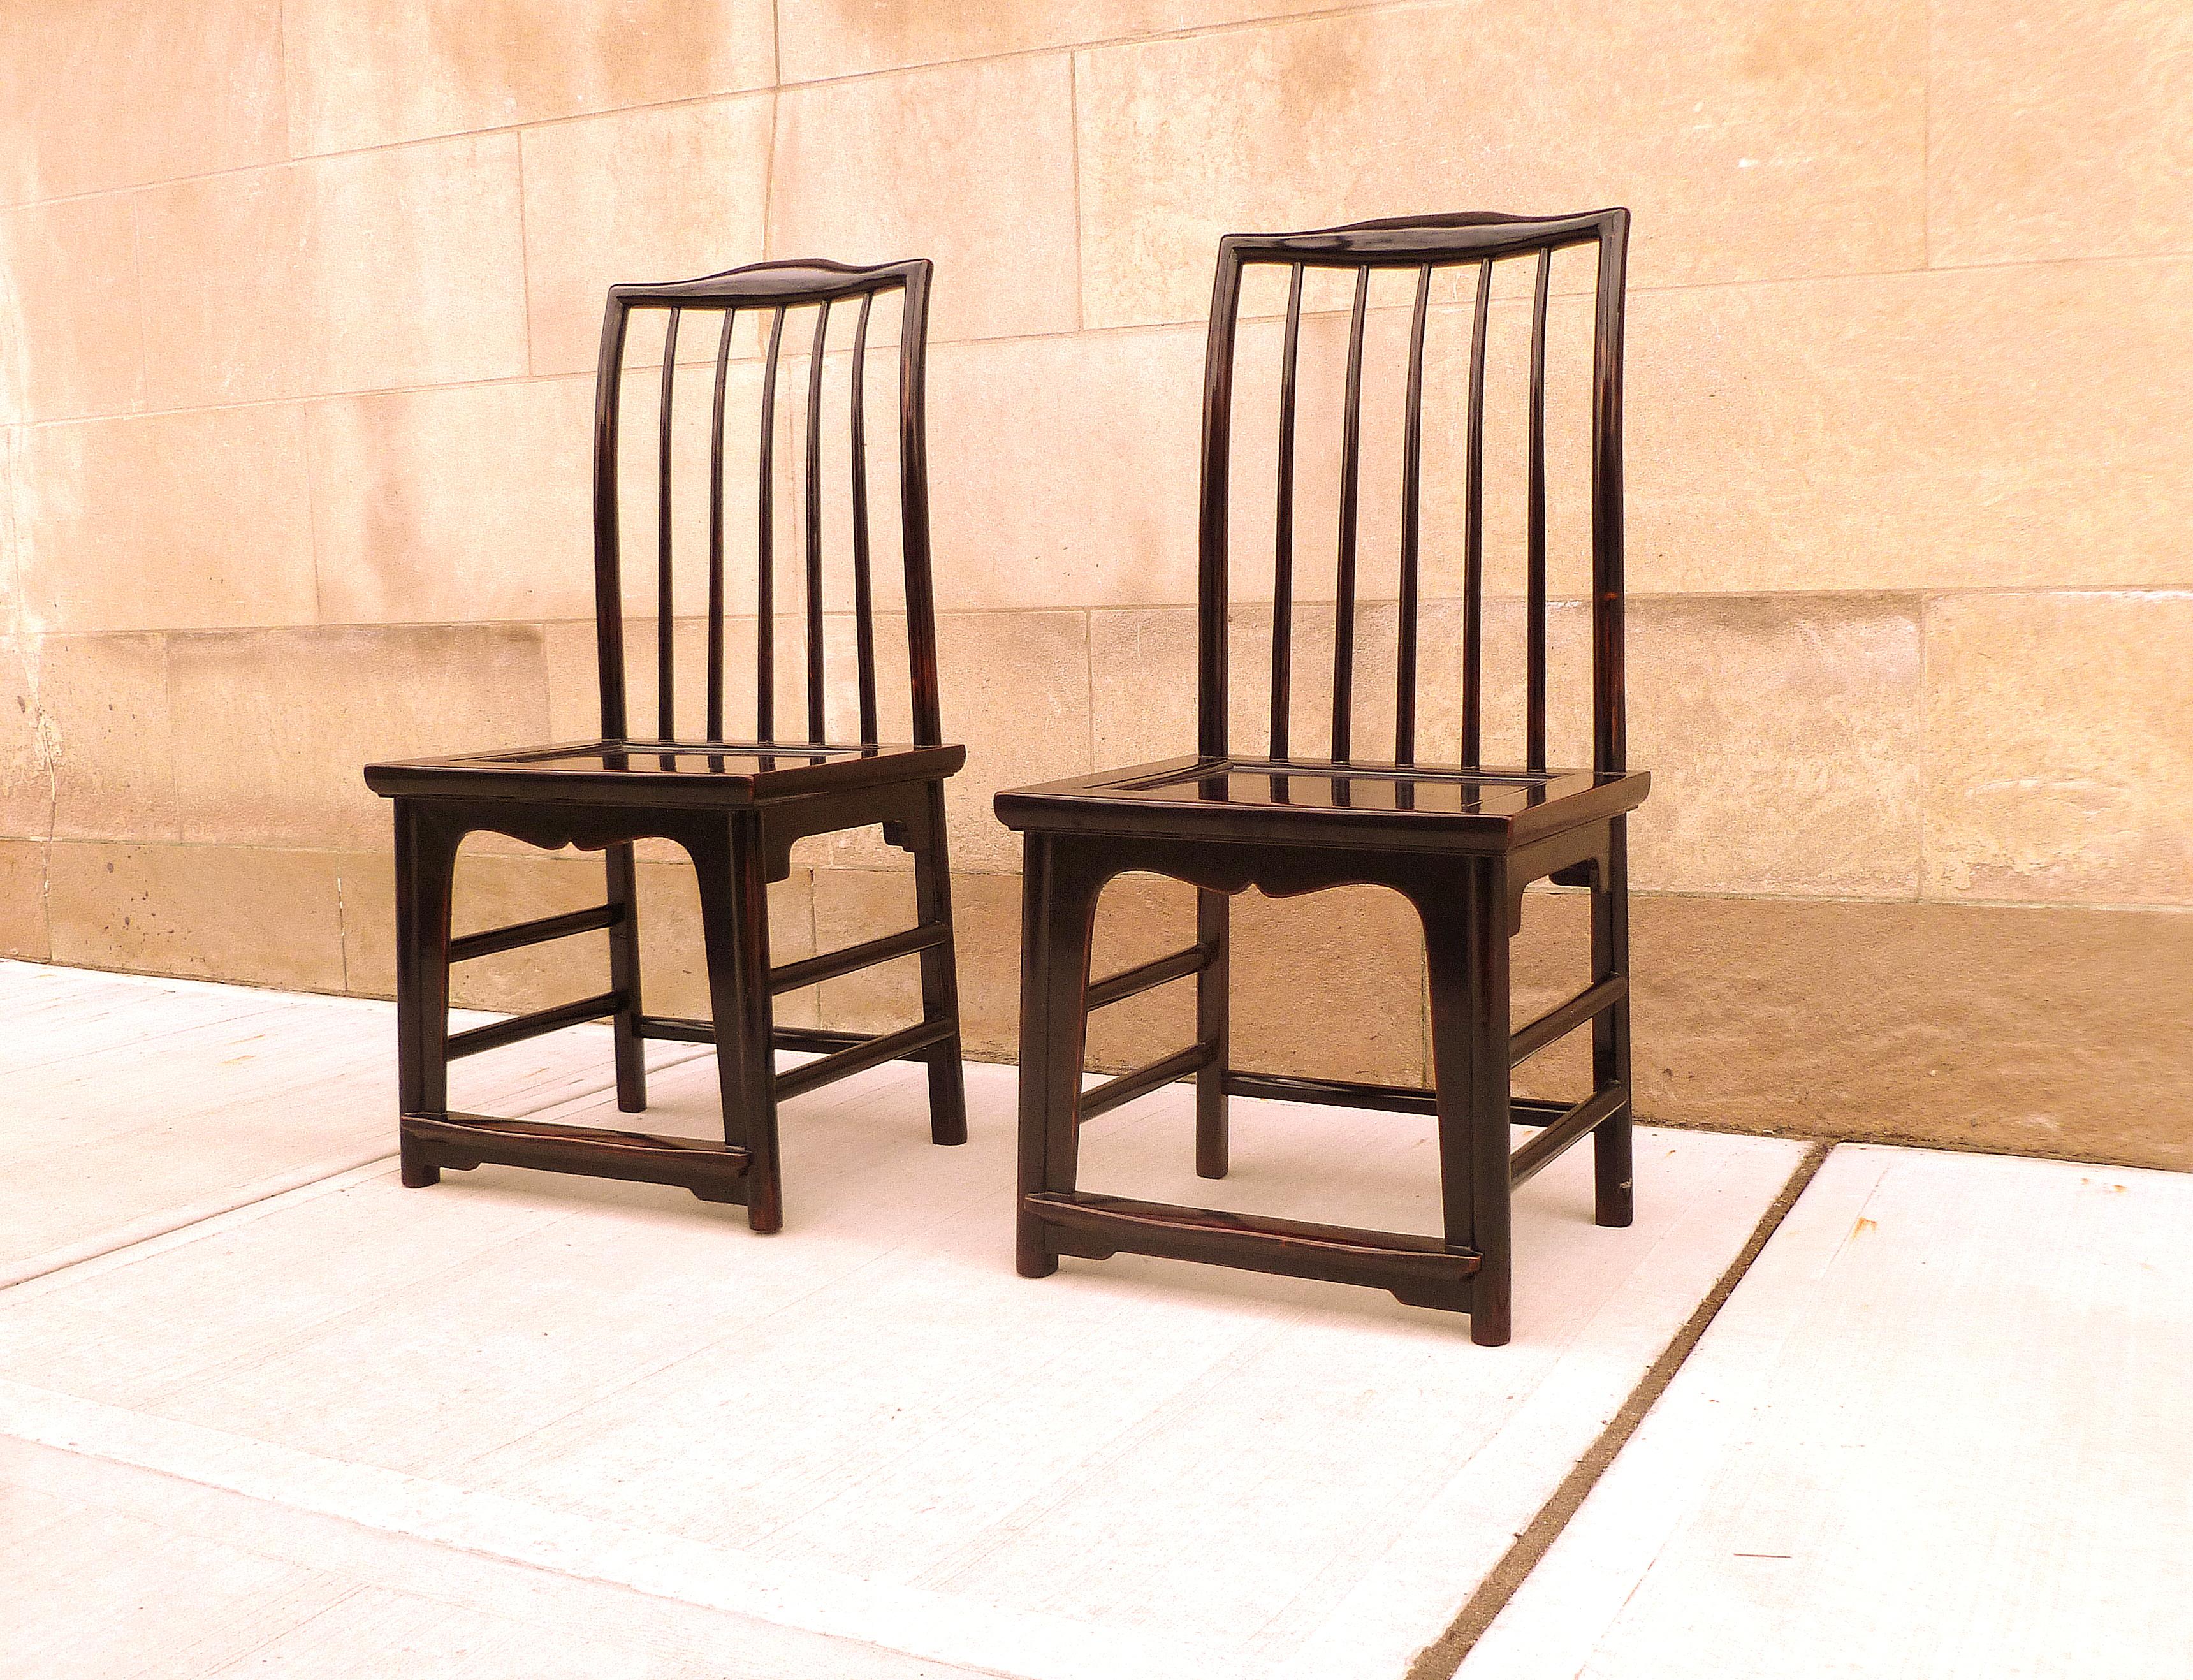 Polished Pair of Black Lacquer Hat Chairs